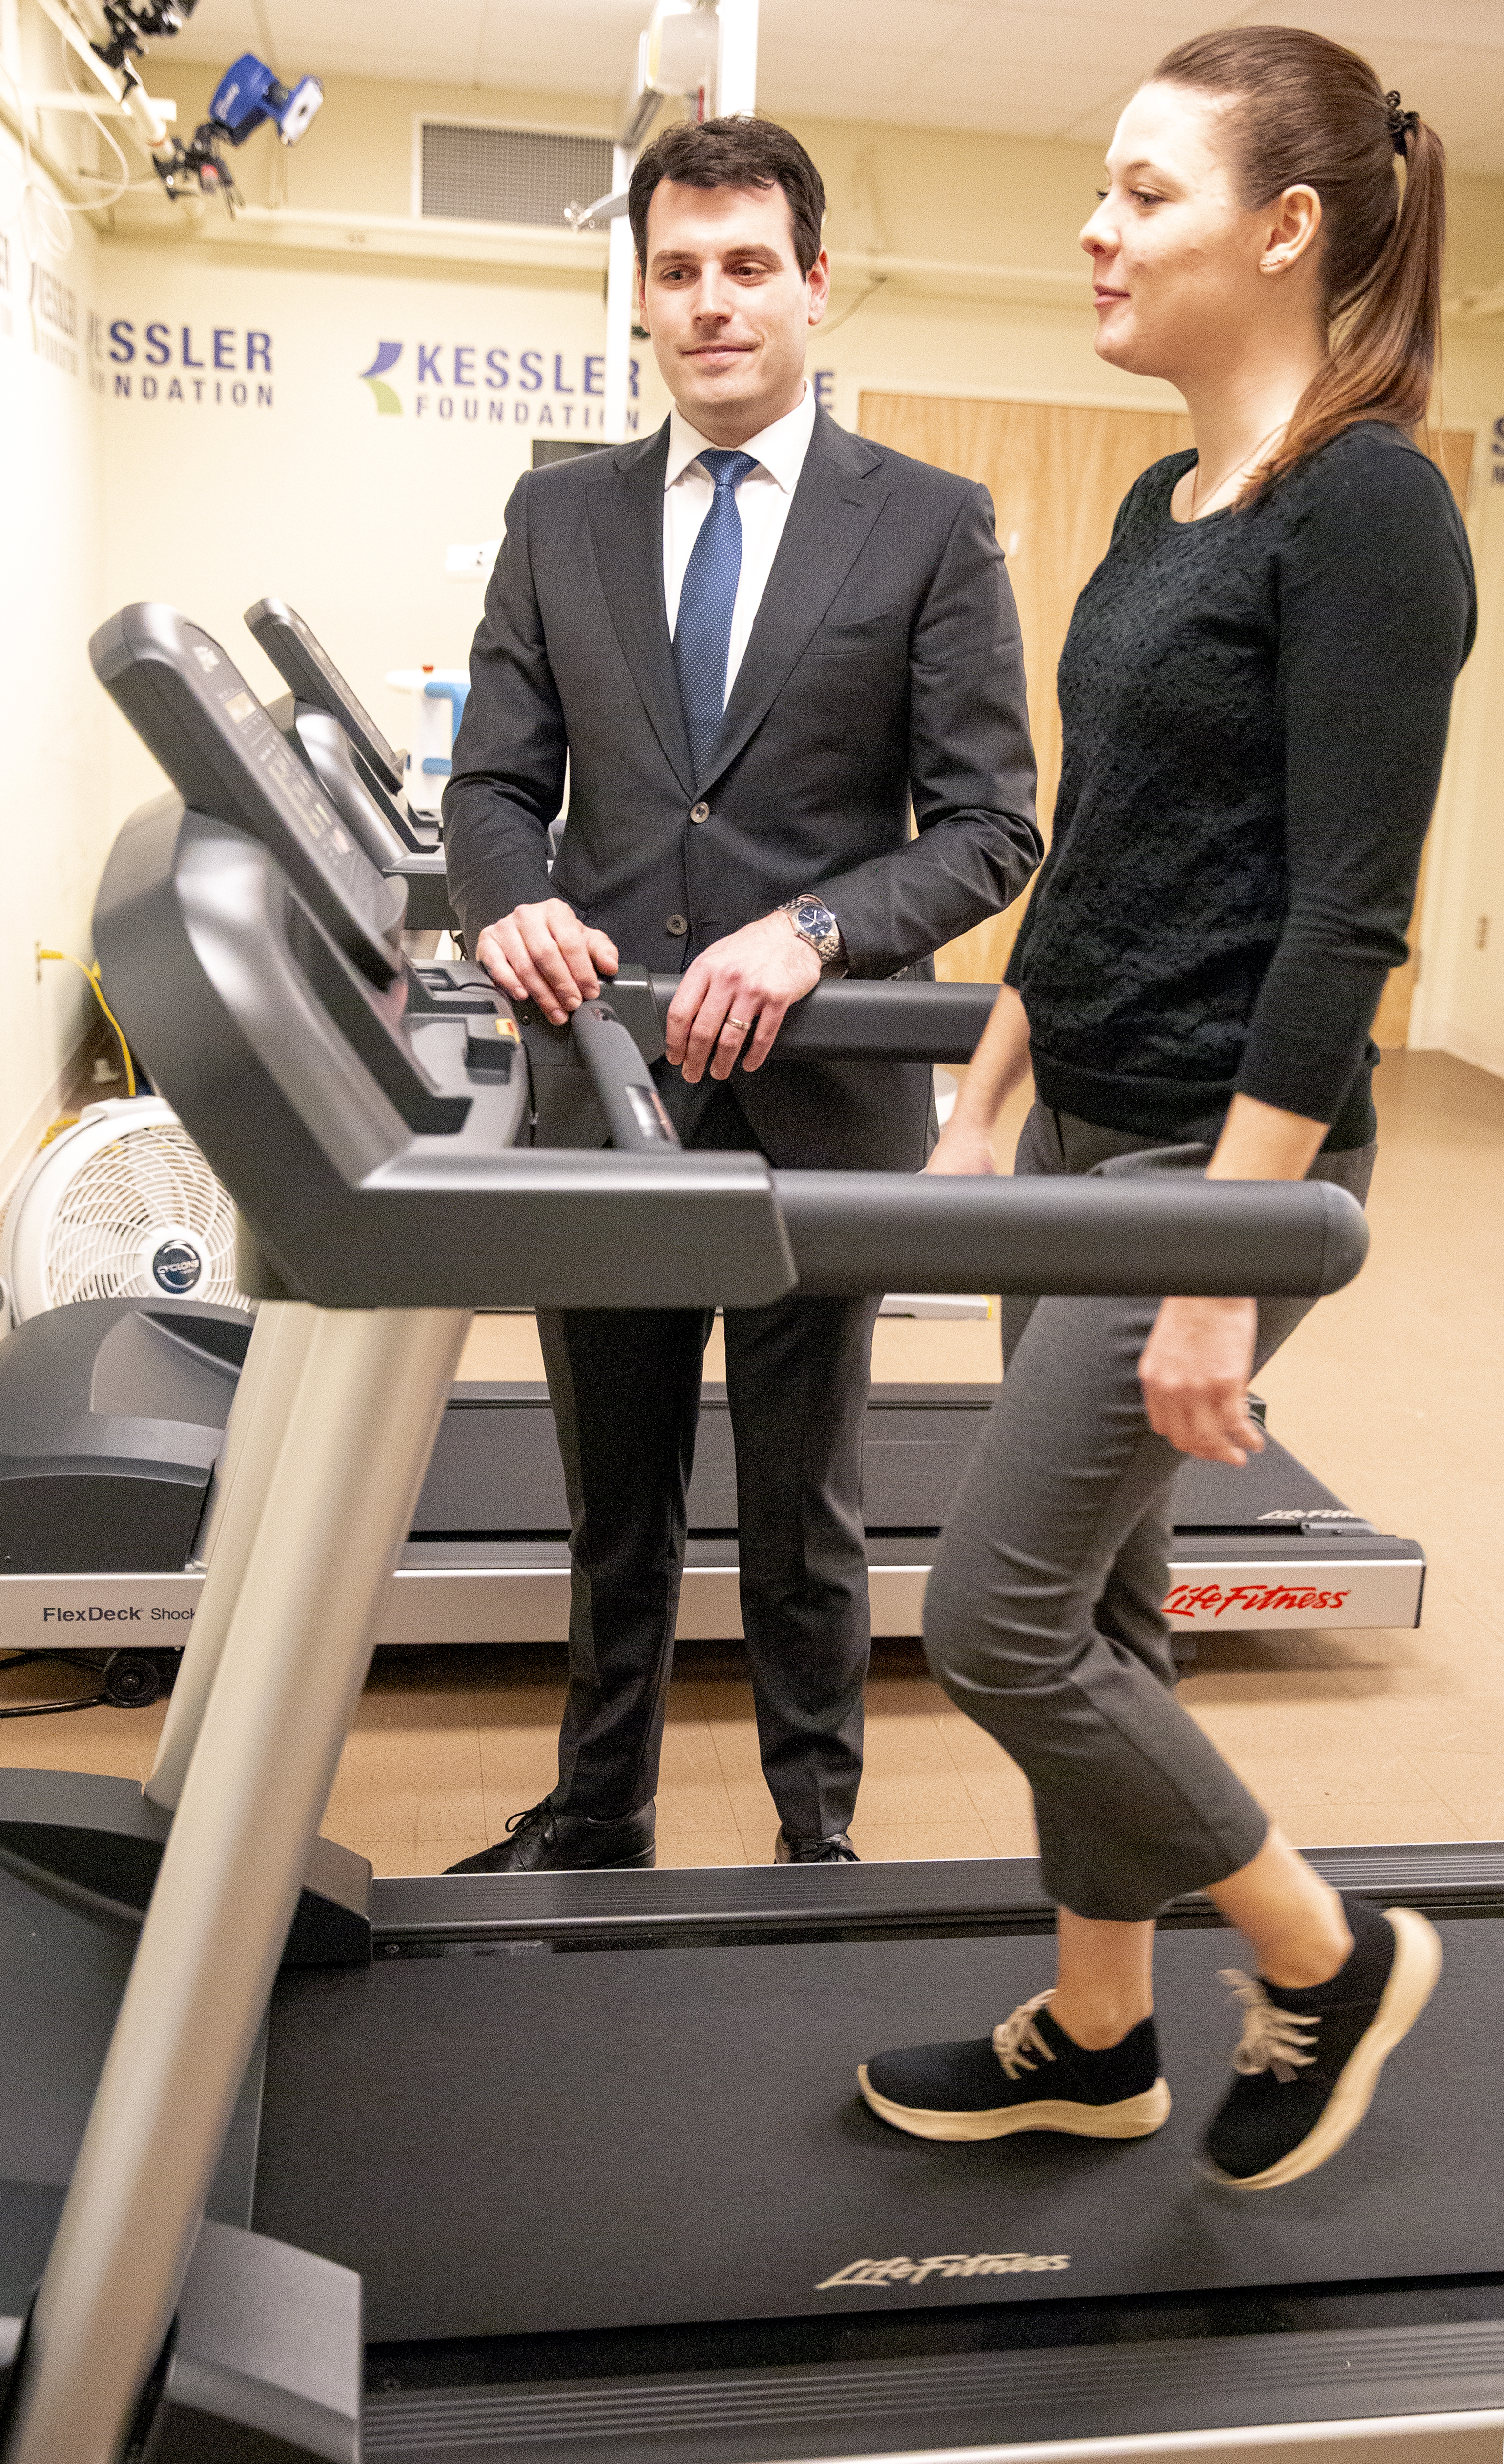 More than a decade of Kessler Foundation< exercise research drives this latest study.